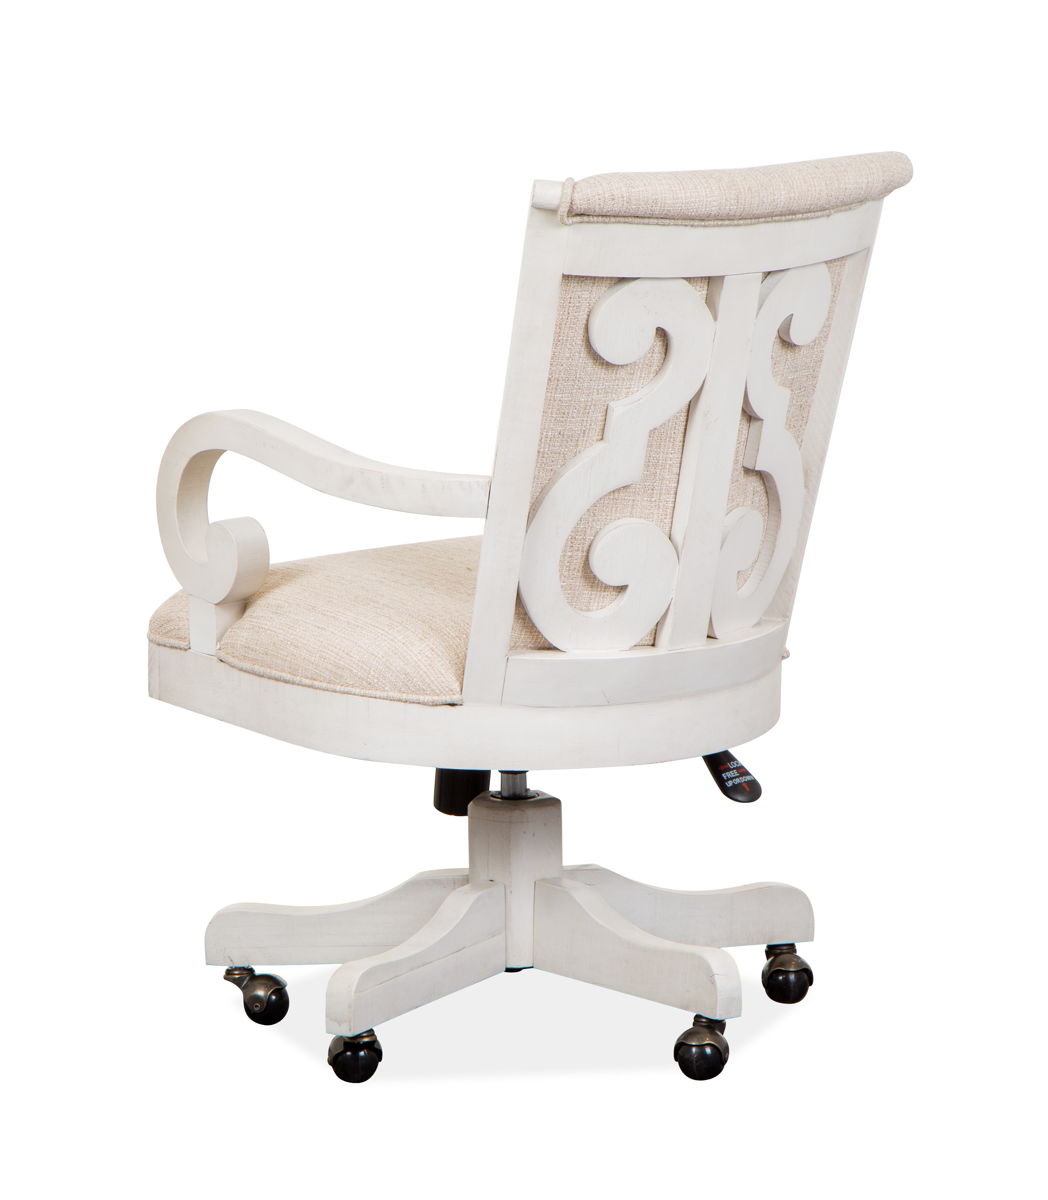 Bronwyn - Fully Upholstered Swivel Chair - Alabaster